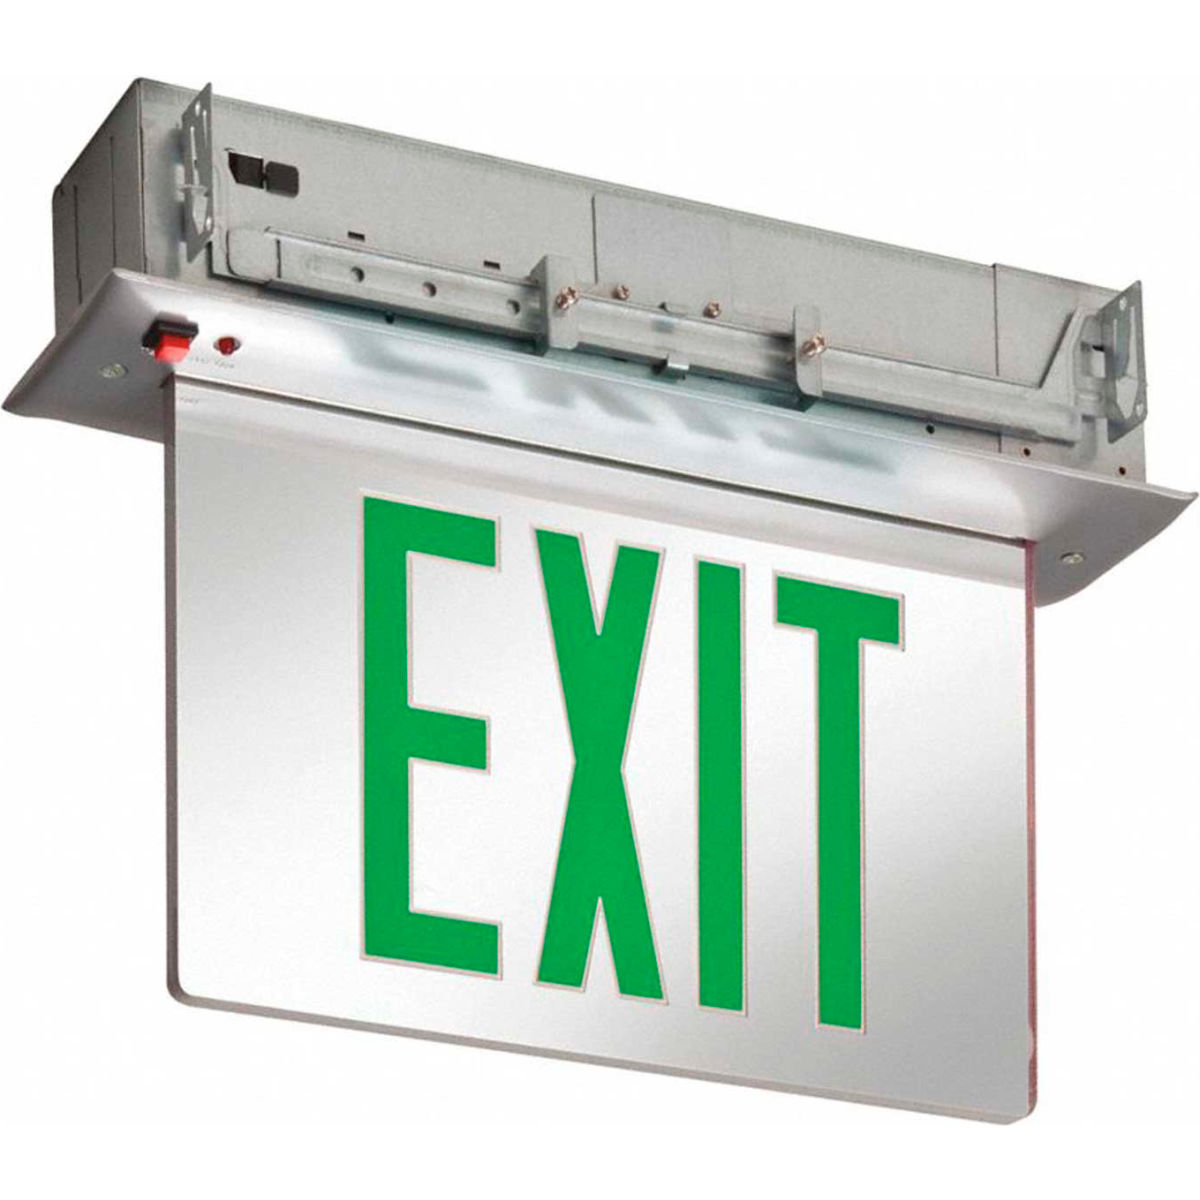 Picture of Acuity Brands B2085130 Lithonia Lighting EDGR 2 GMR EL M4 - LED Edge-Lit Exit Sign - Green